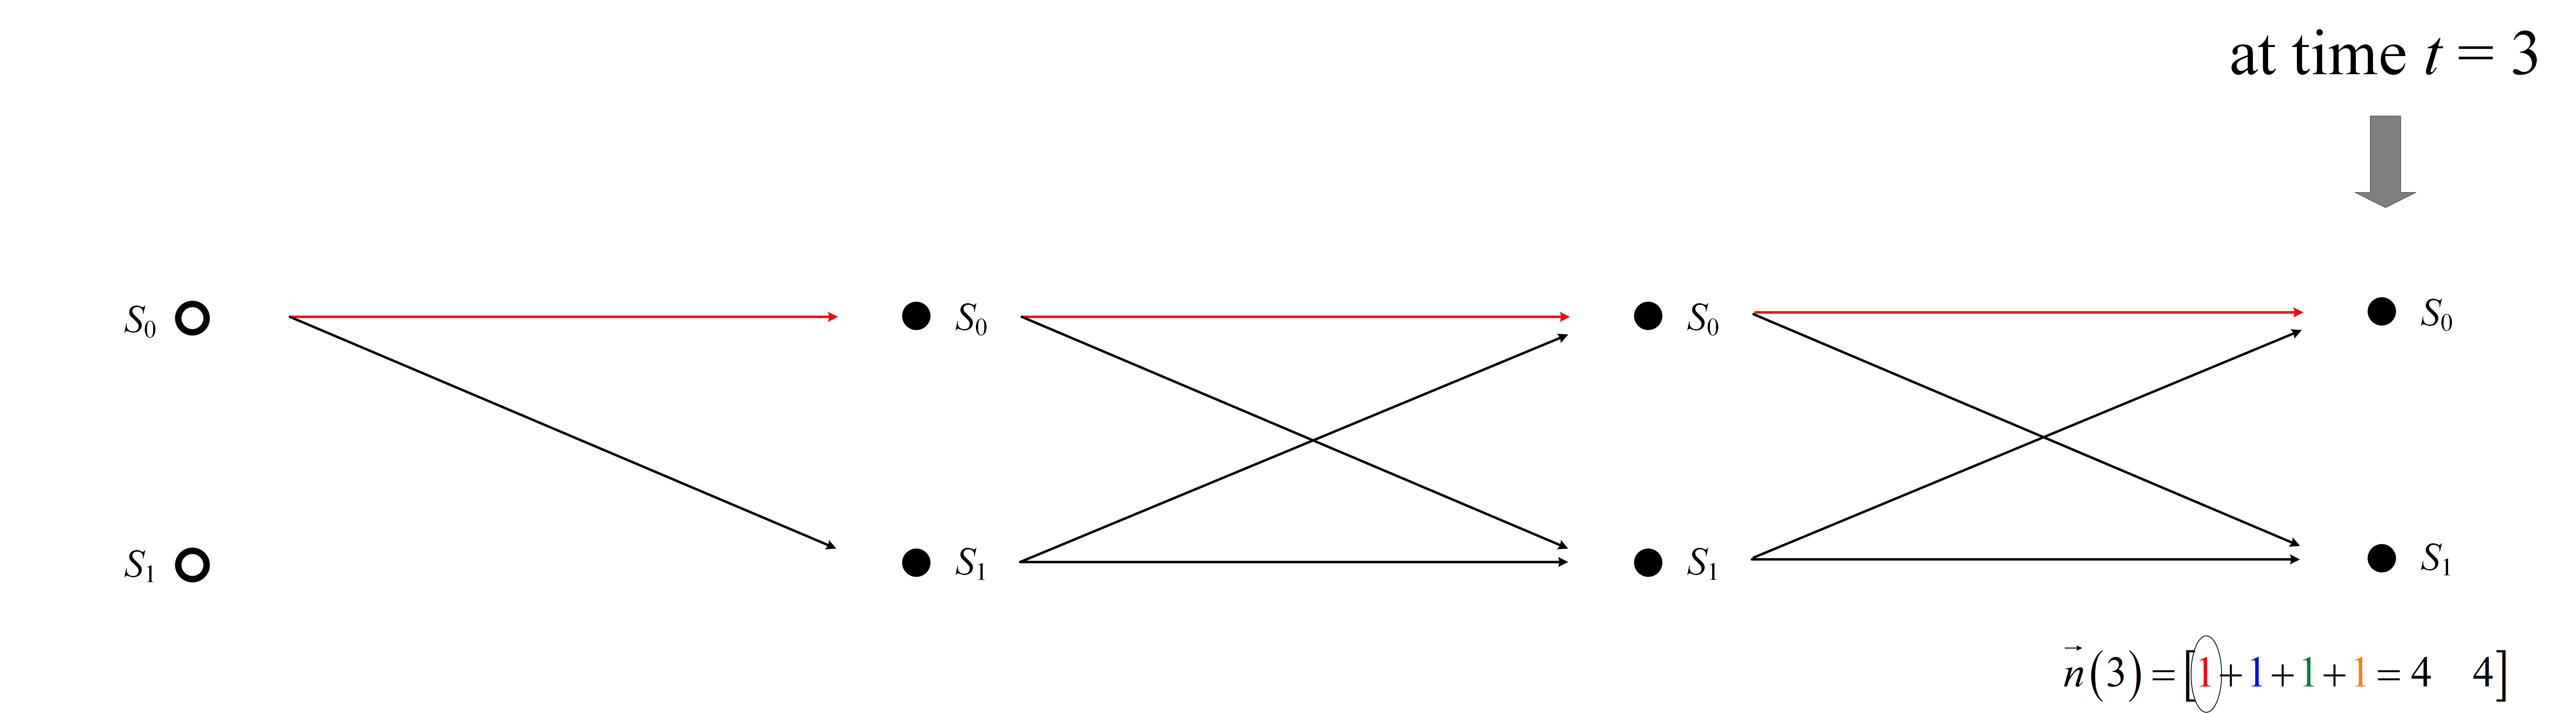 Figure 6 Step-4 construction of Trellis diagram at time t = 3 higlighting (red) only one Trellis path